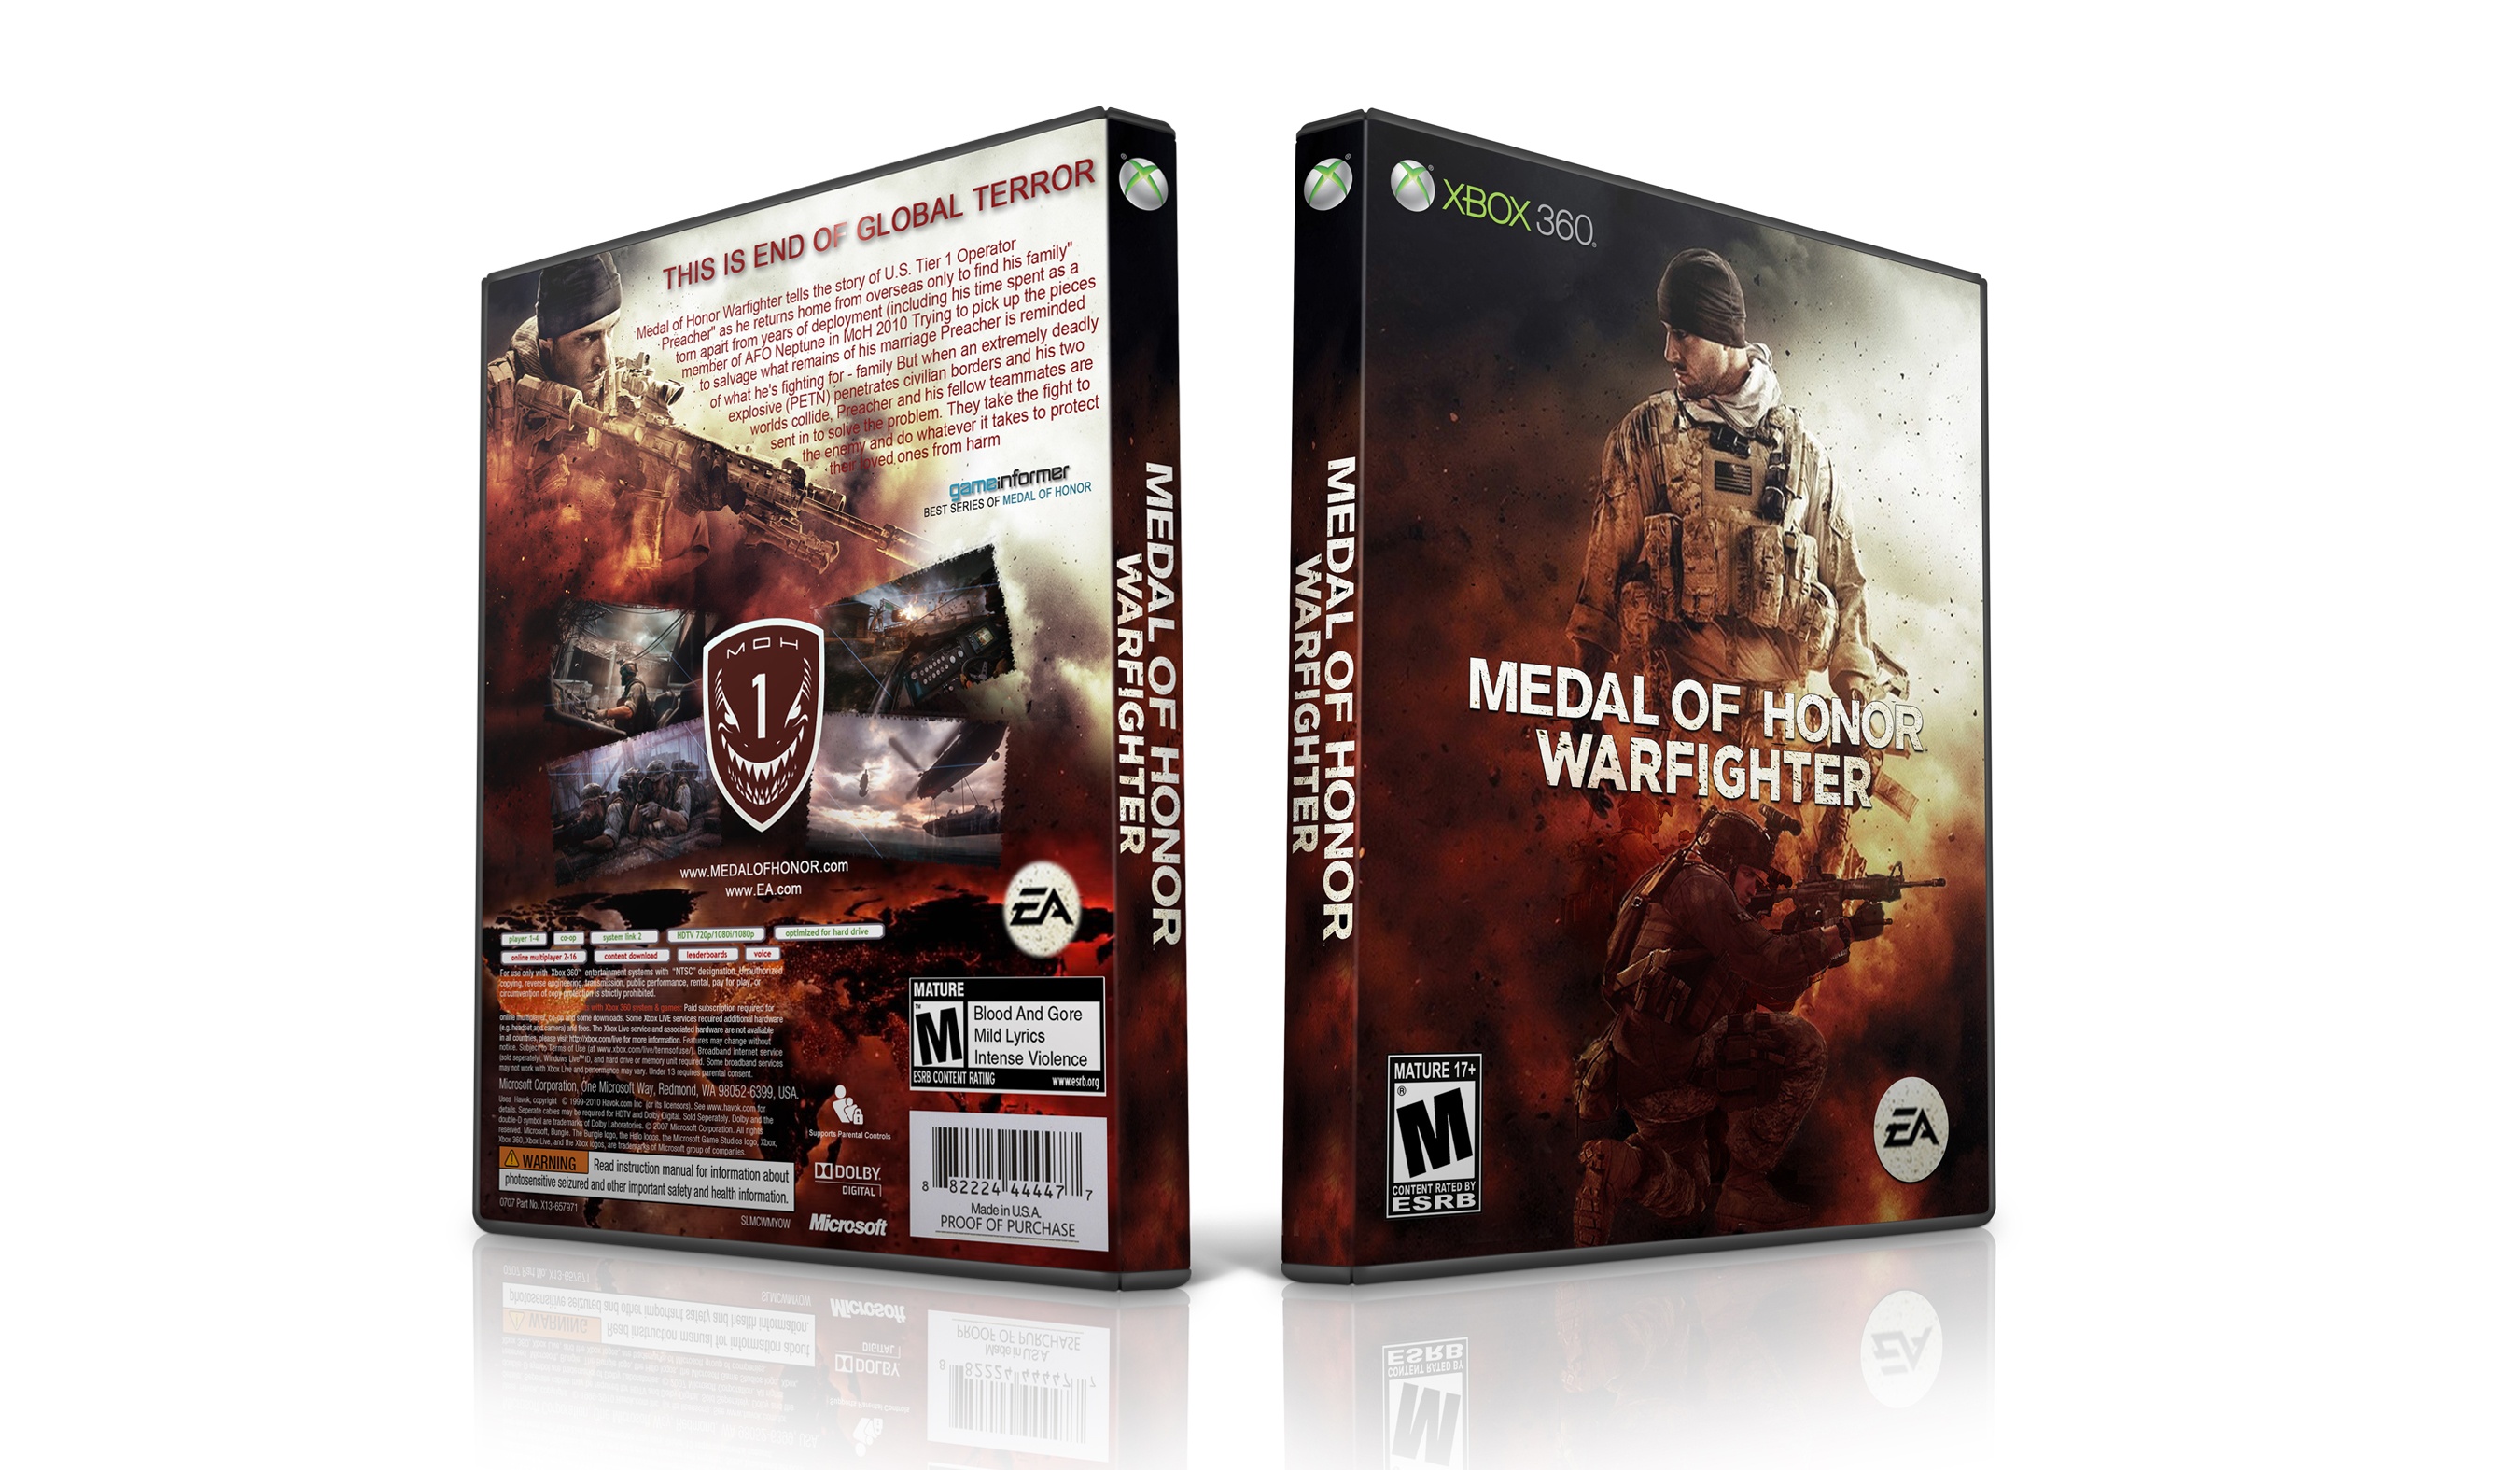 Medal of honor трейнер. Medal of Honor Xbox 360. Medal of Honor Warfighter Xbox 360 Disk.